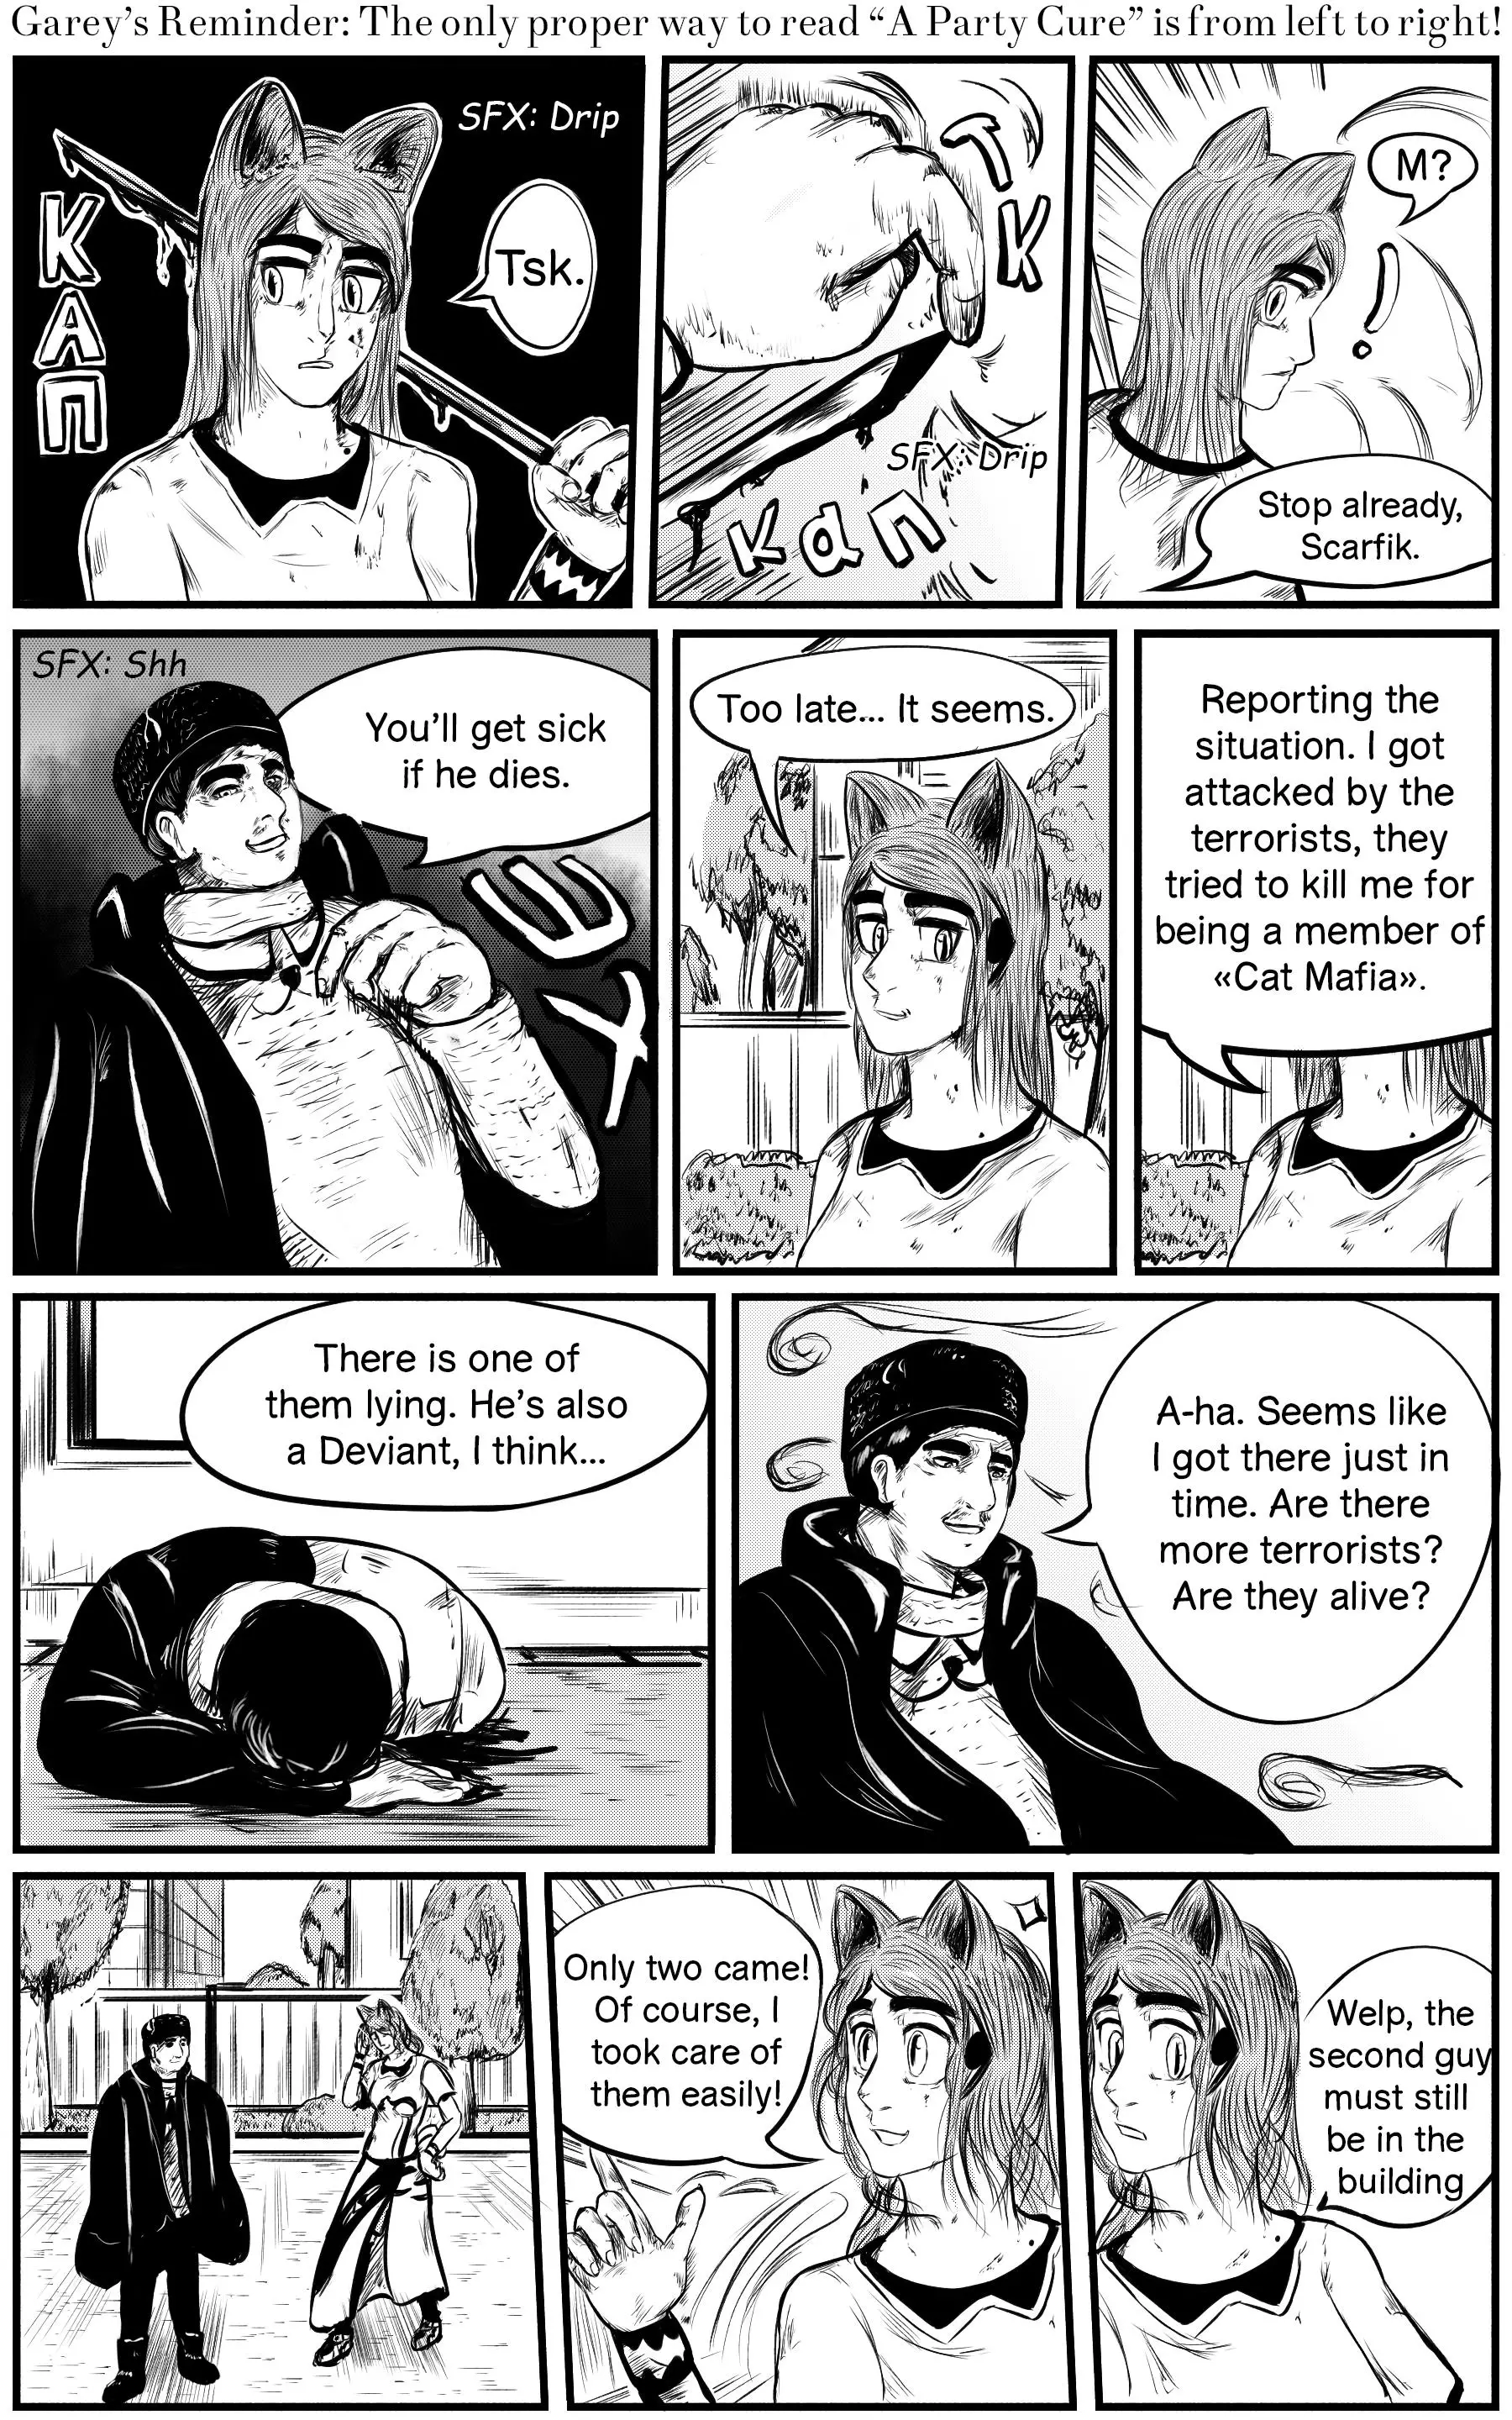 A Party Cure - 8 page 2-84ca29d7